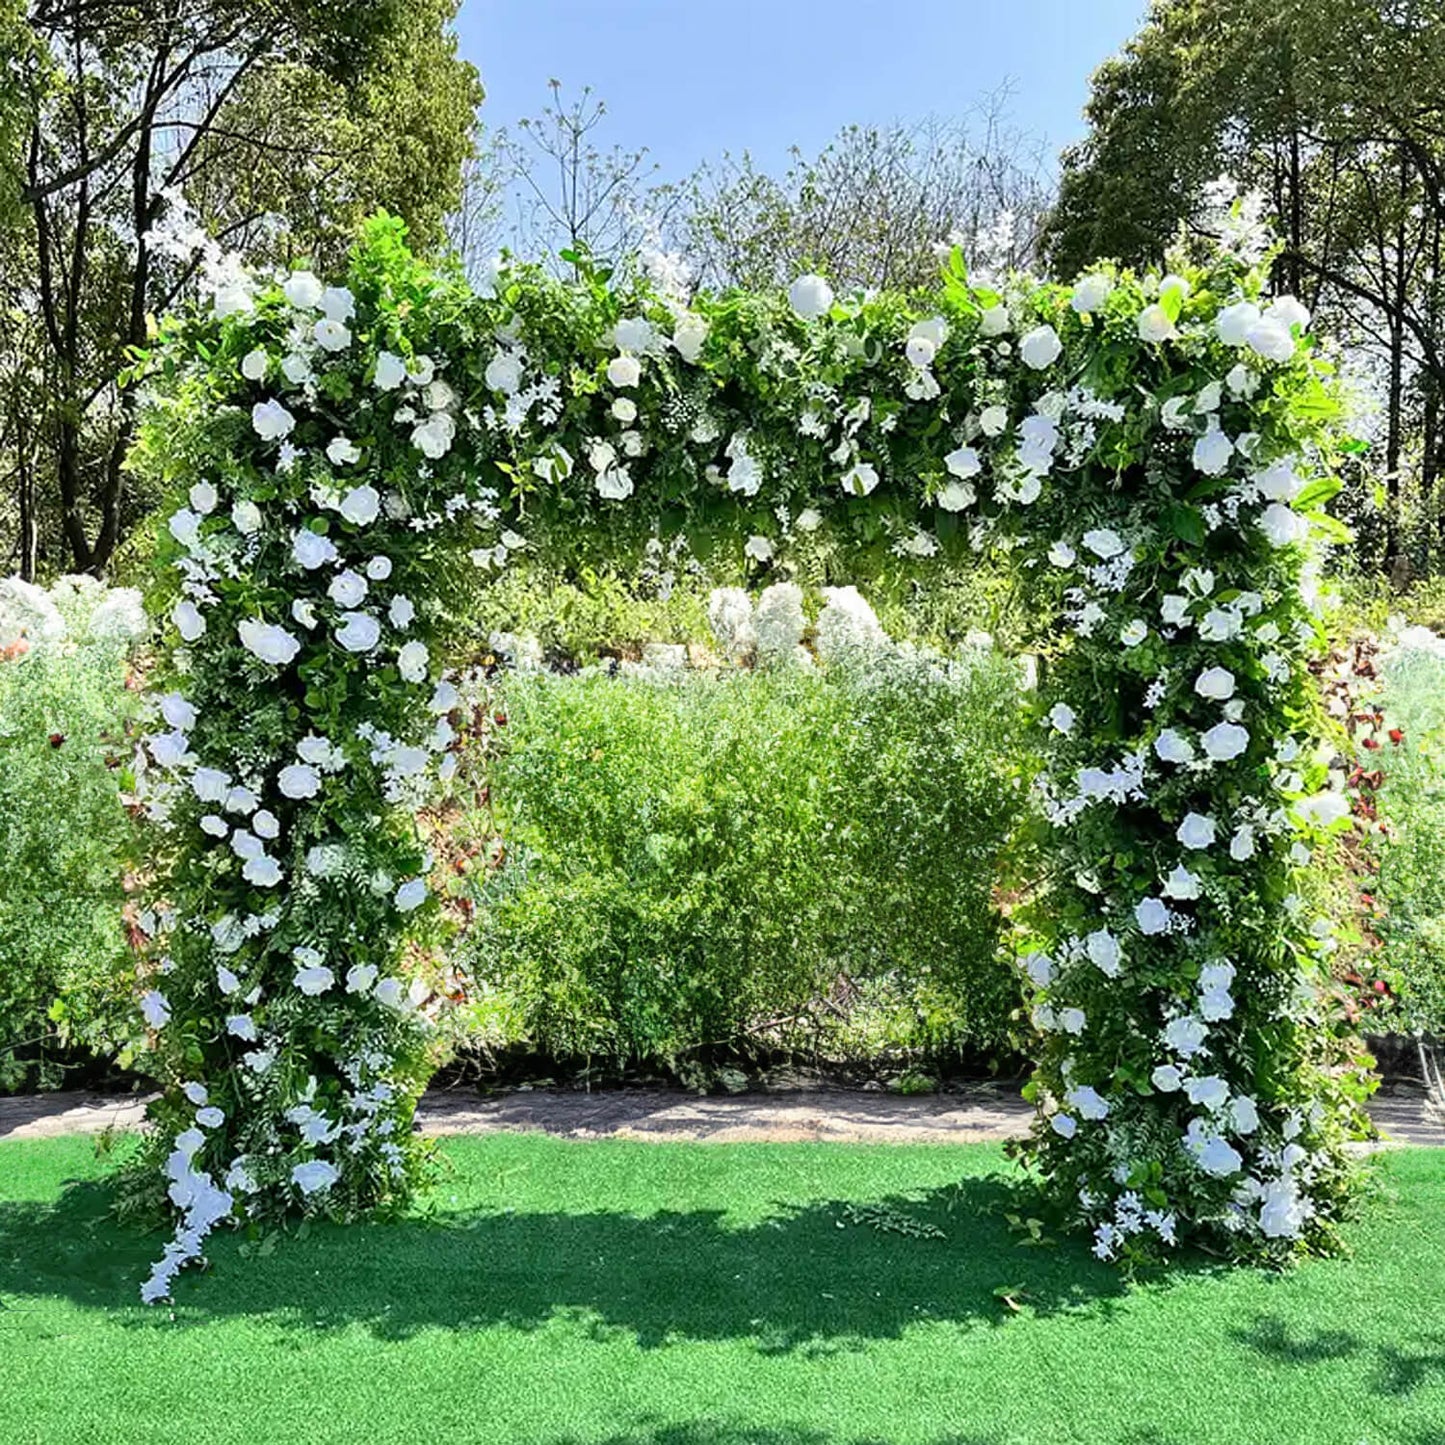 Green White Roses Fabric Artificial Flower Wall Arch Wedding Party Decoration-ubackdrop